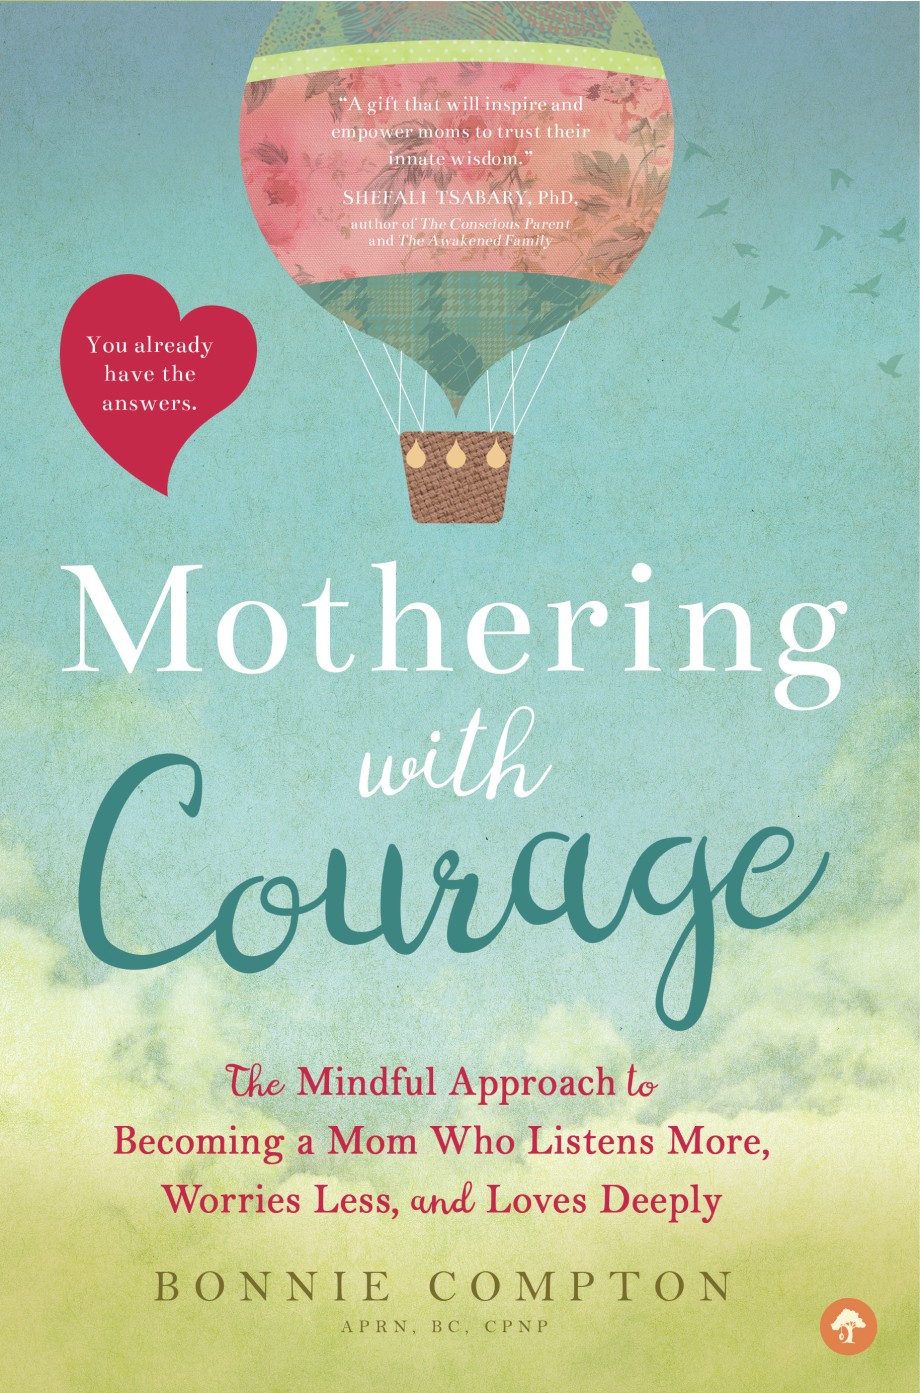 Mothering with Courage The Mindful Approach to Becoming a Mom Who Listens More, Worries Less, and Loves Deeply